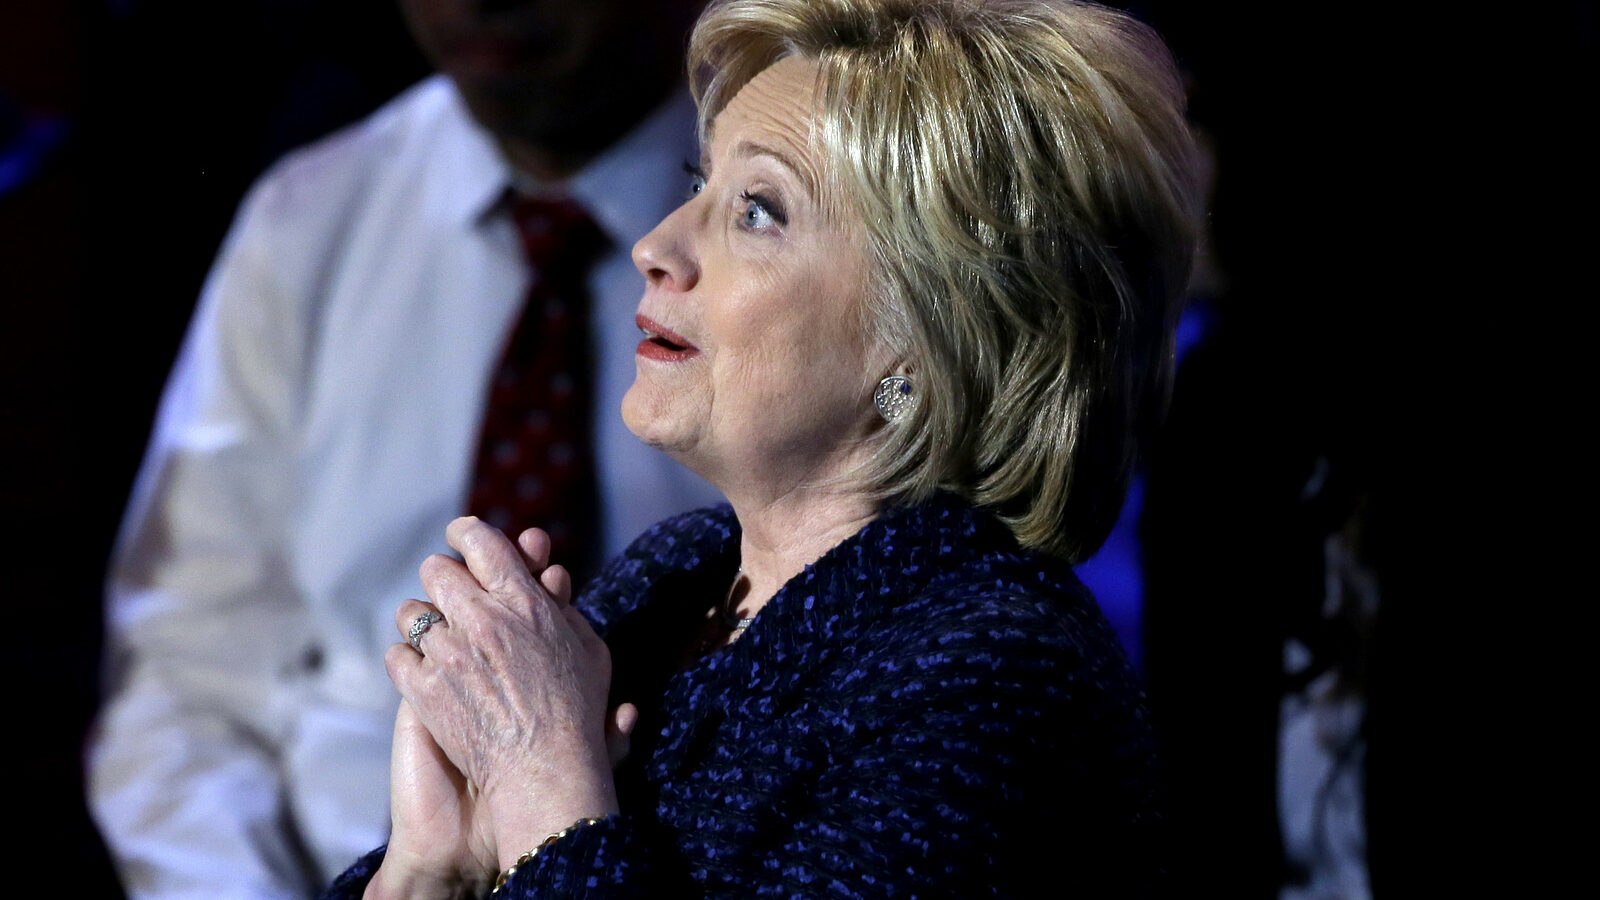 Democratic presidential candidate, Hillary Clinton gestures as she speaks during the Brown & Black Forum, Monday, Jan. 11, 2016, in Des Moines, Iowa. (AP Photo/Charlie Neibergall)